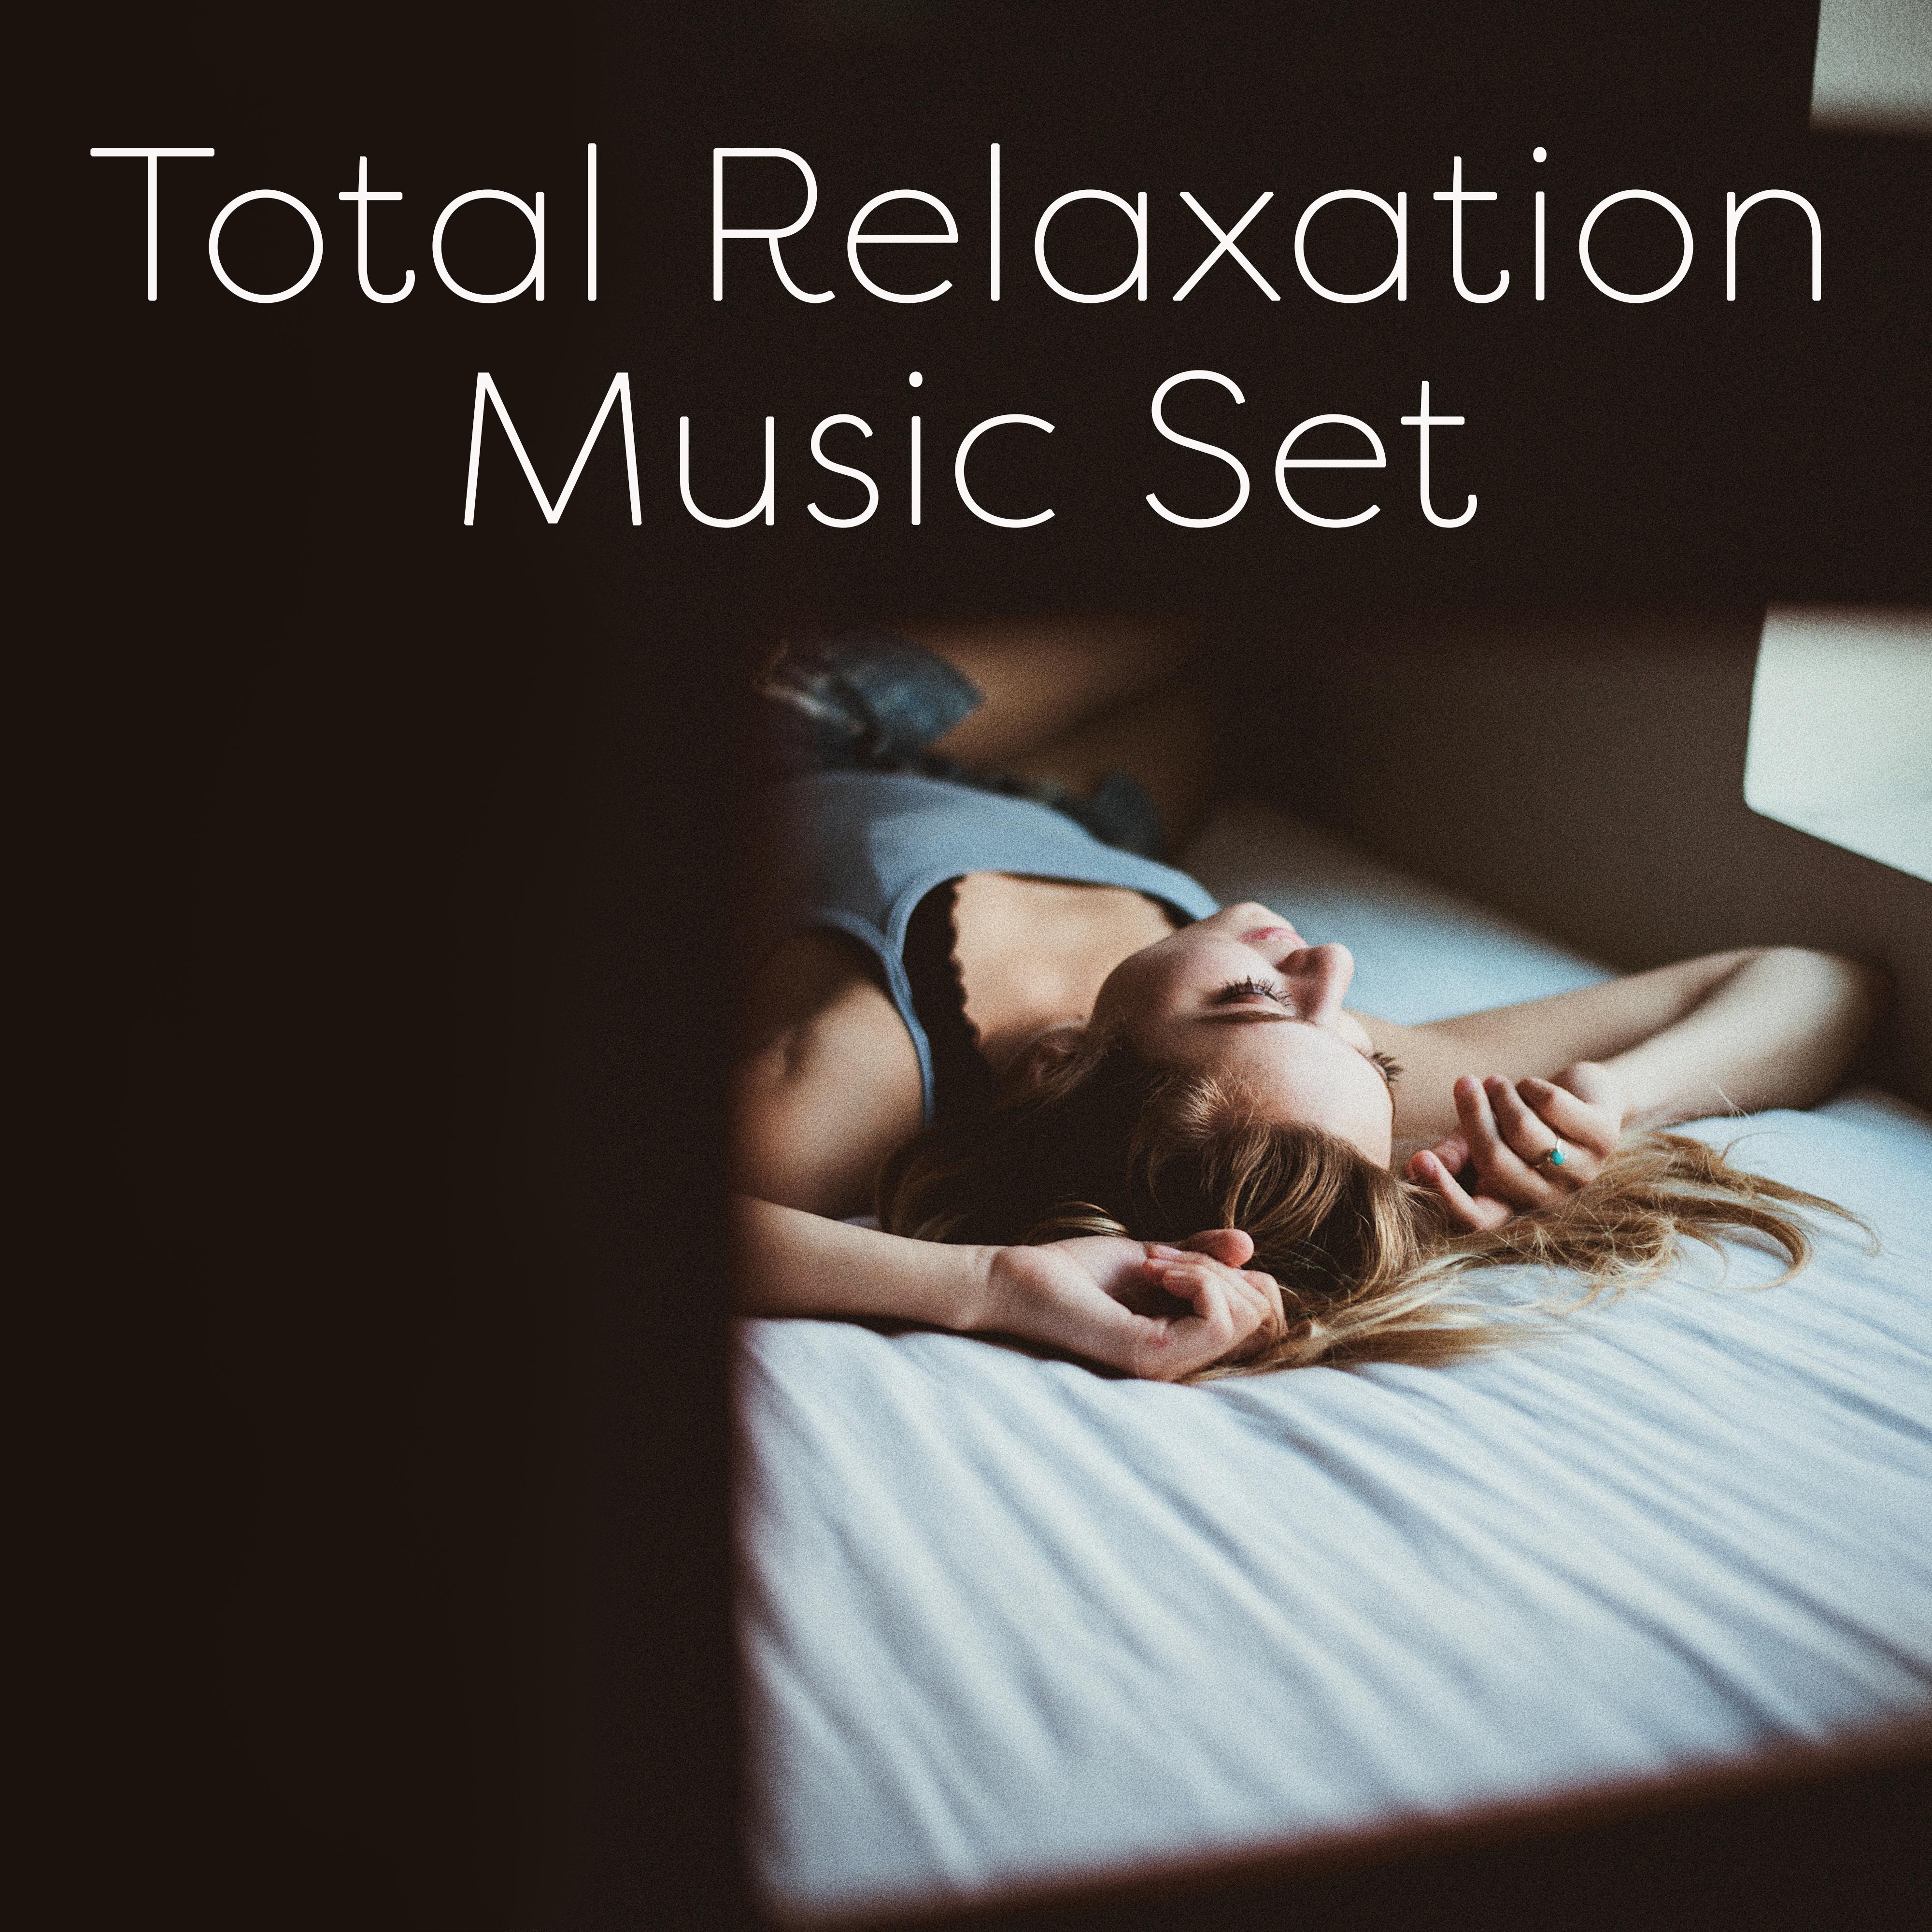 Total Relaxation Music Set